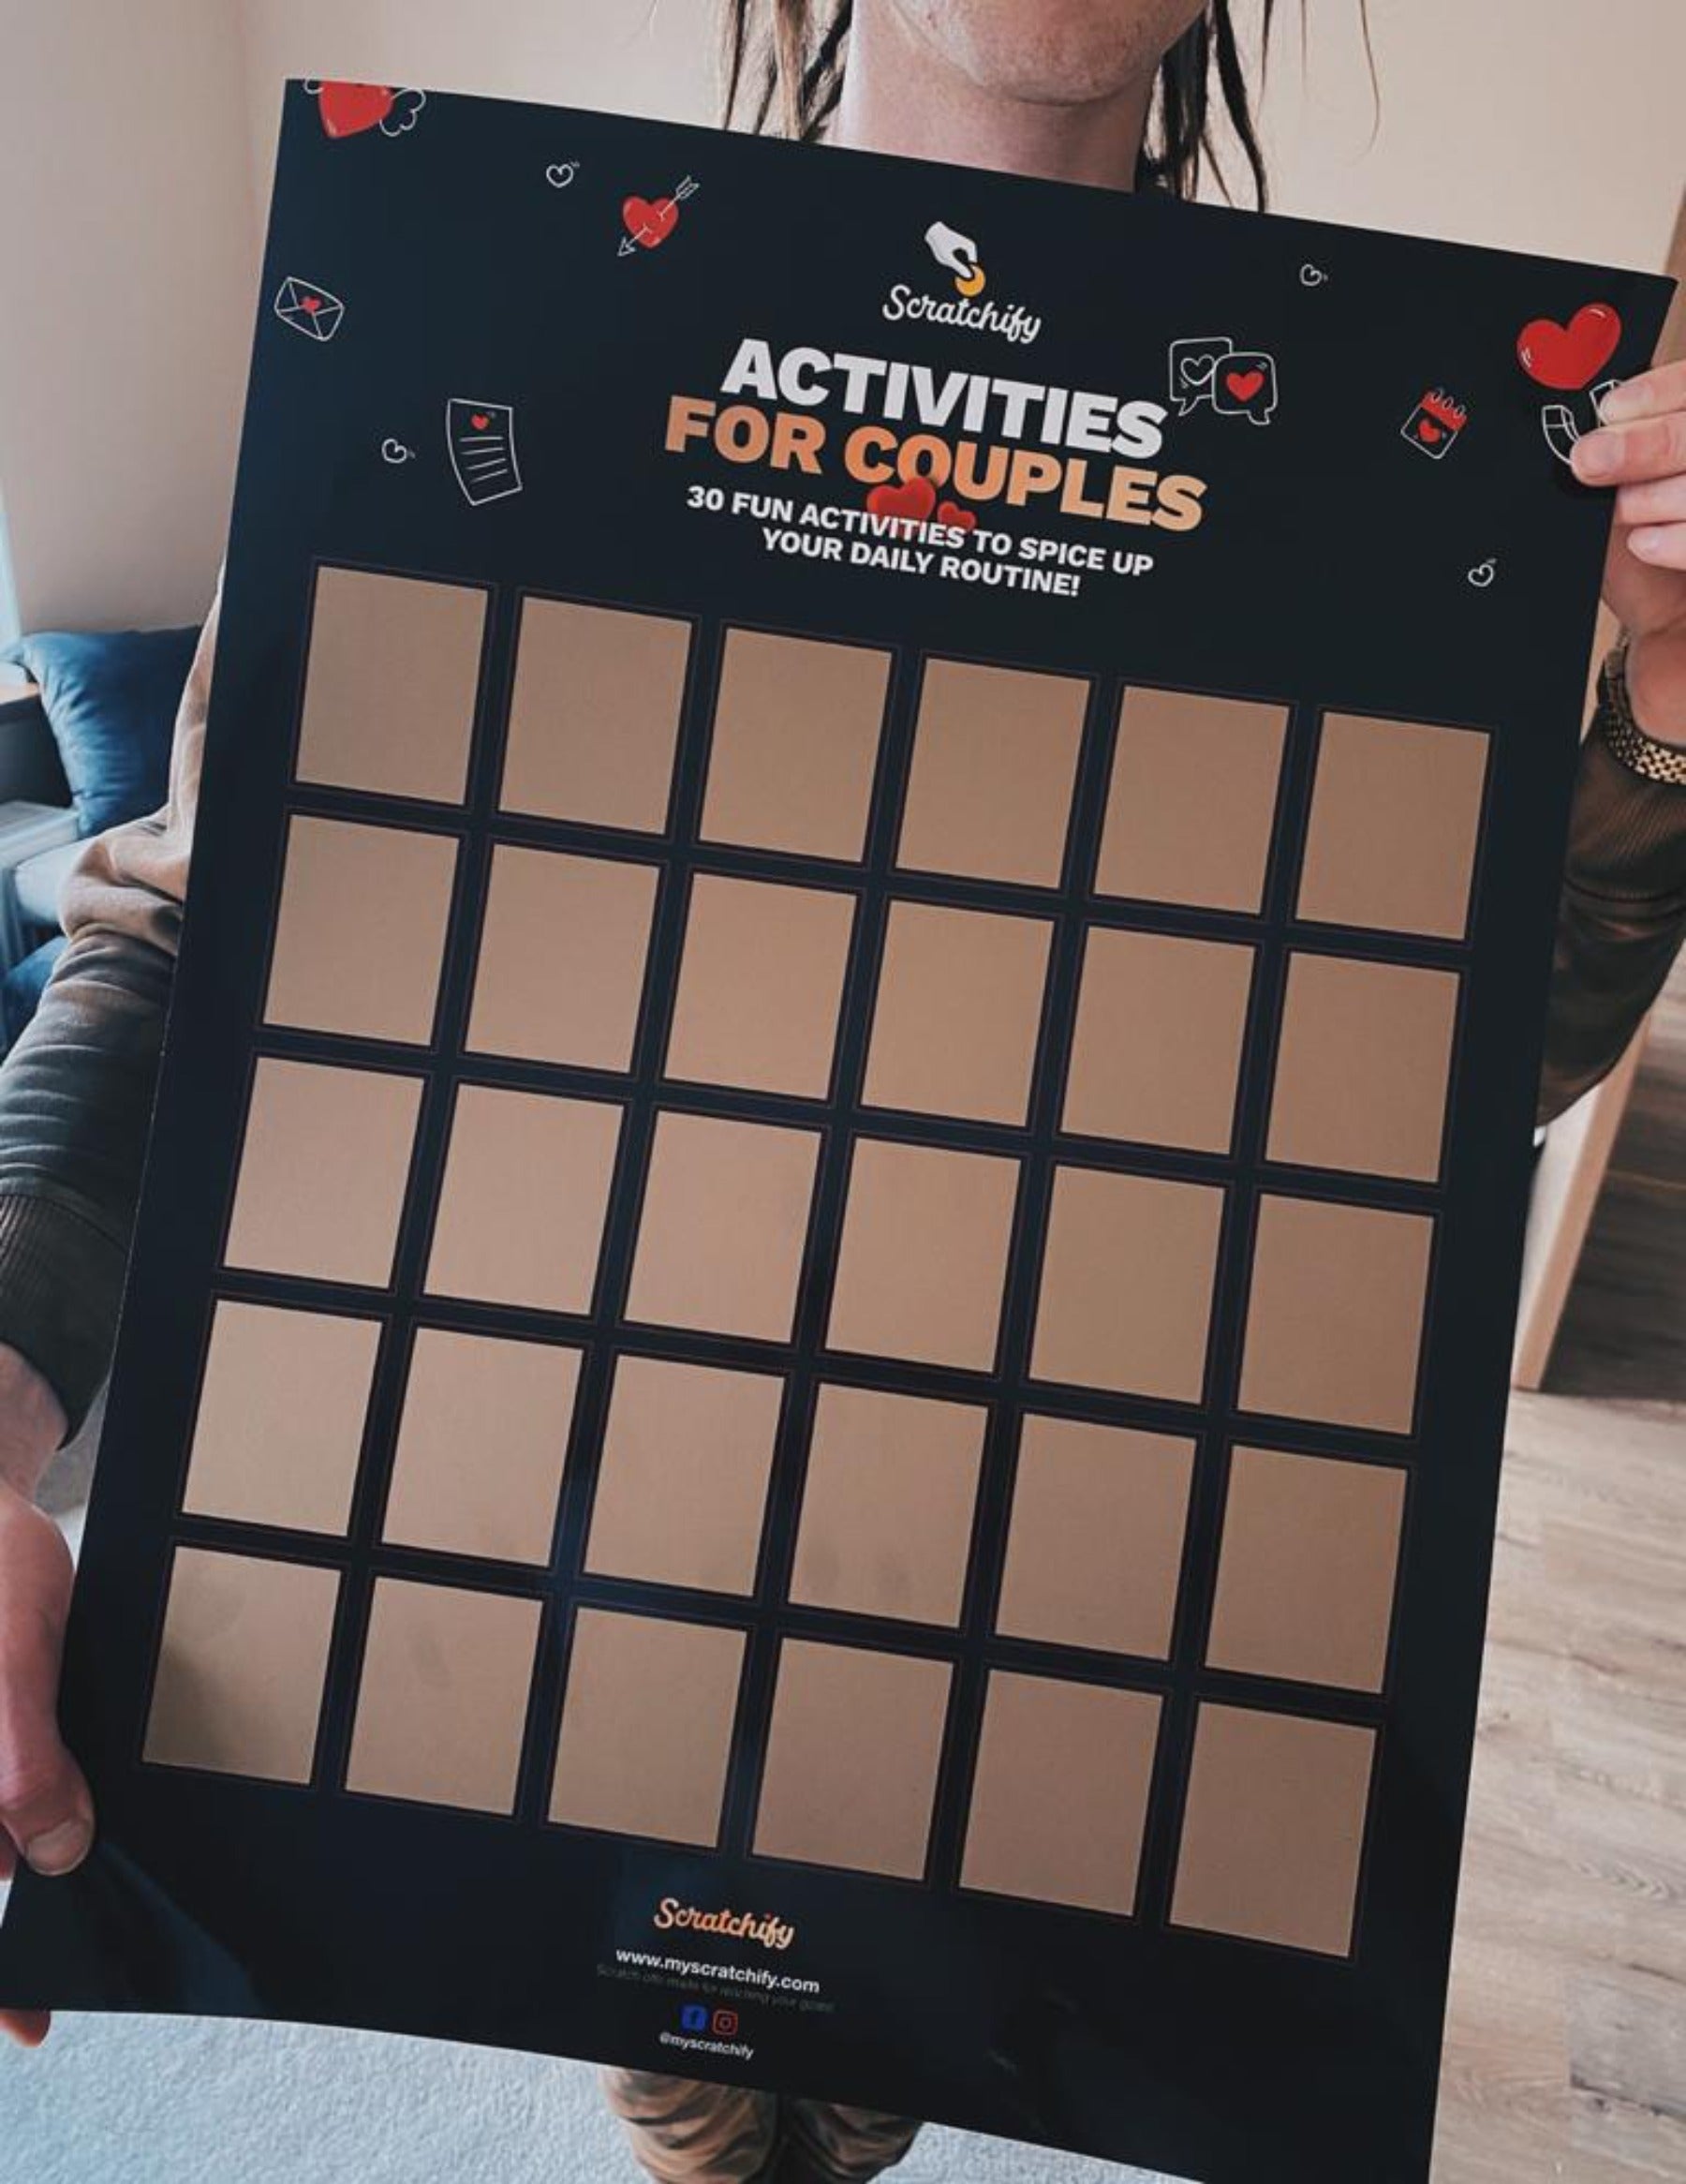 Scratch-off poster activities for couples, 30 fun activities to spice up your daily routine!